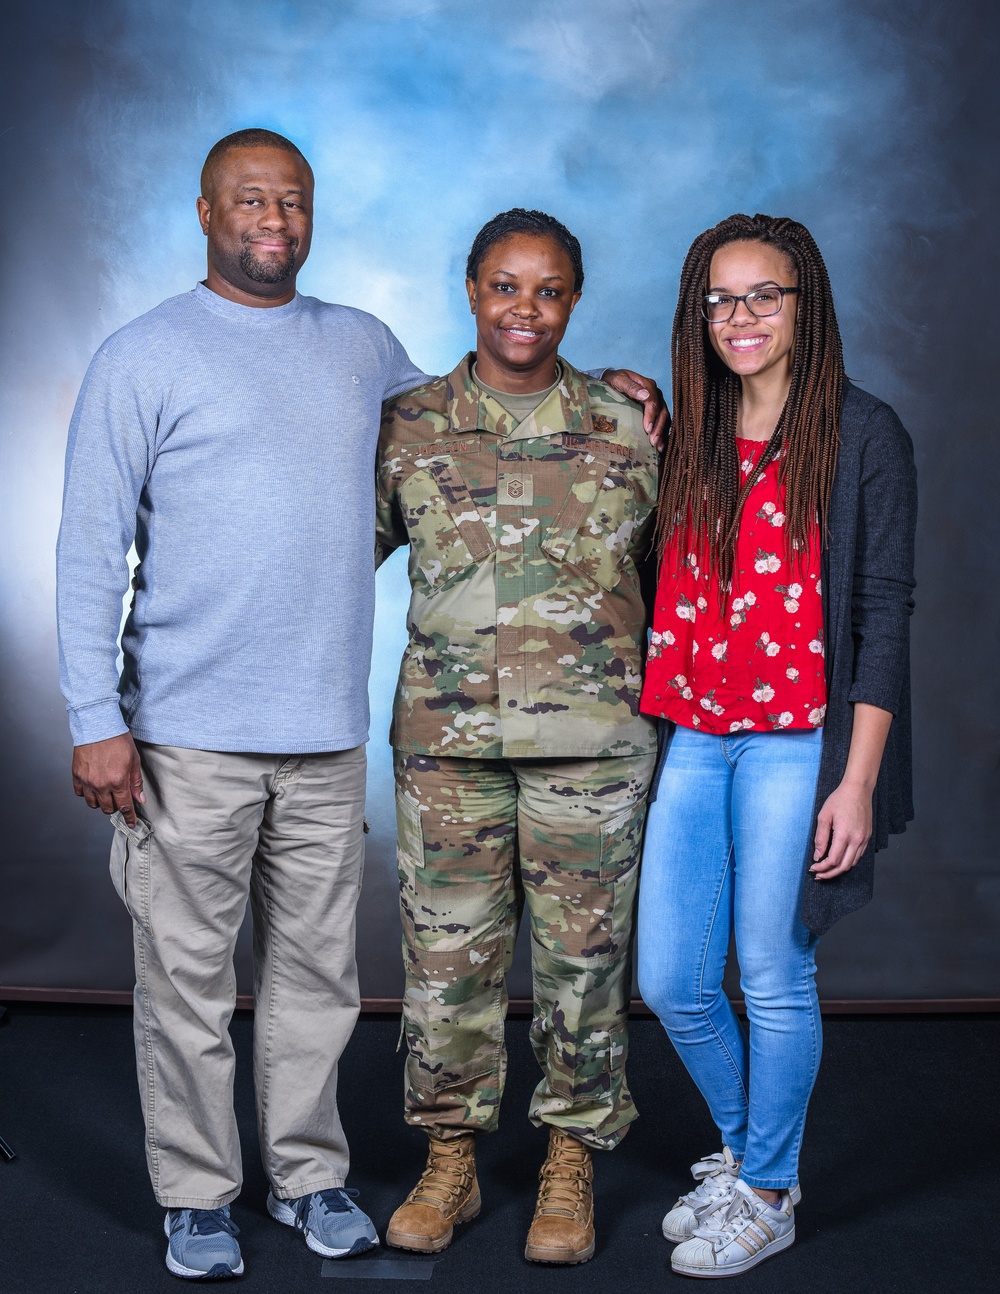 From Clarendon to Cannon: A first sergeant’s story